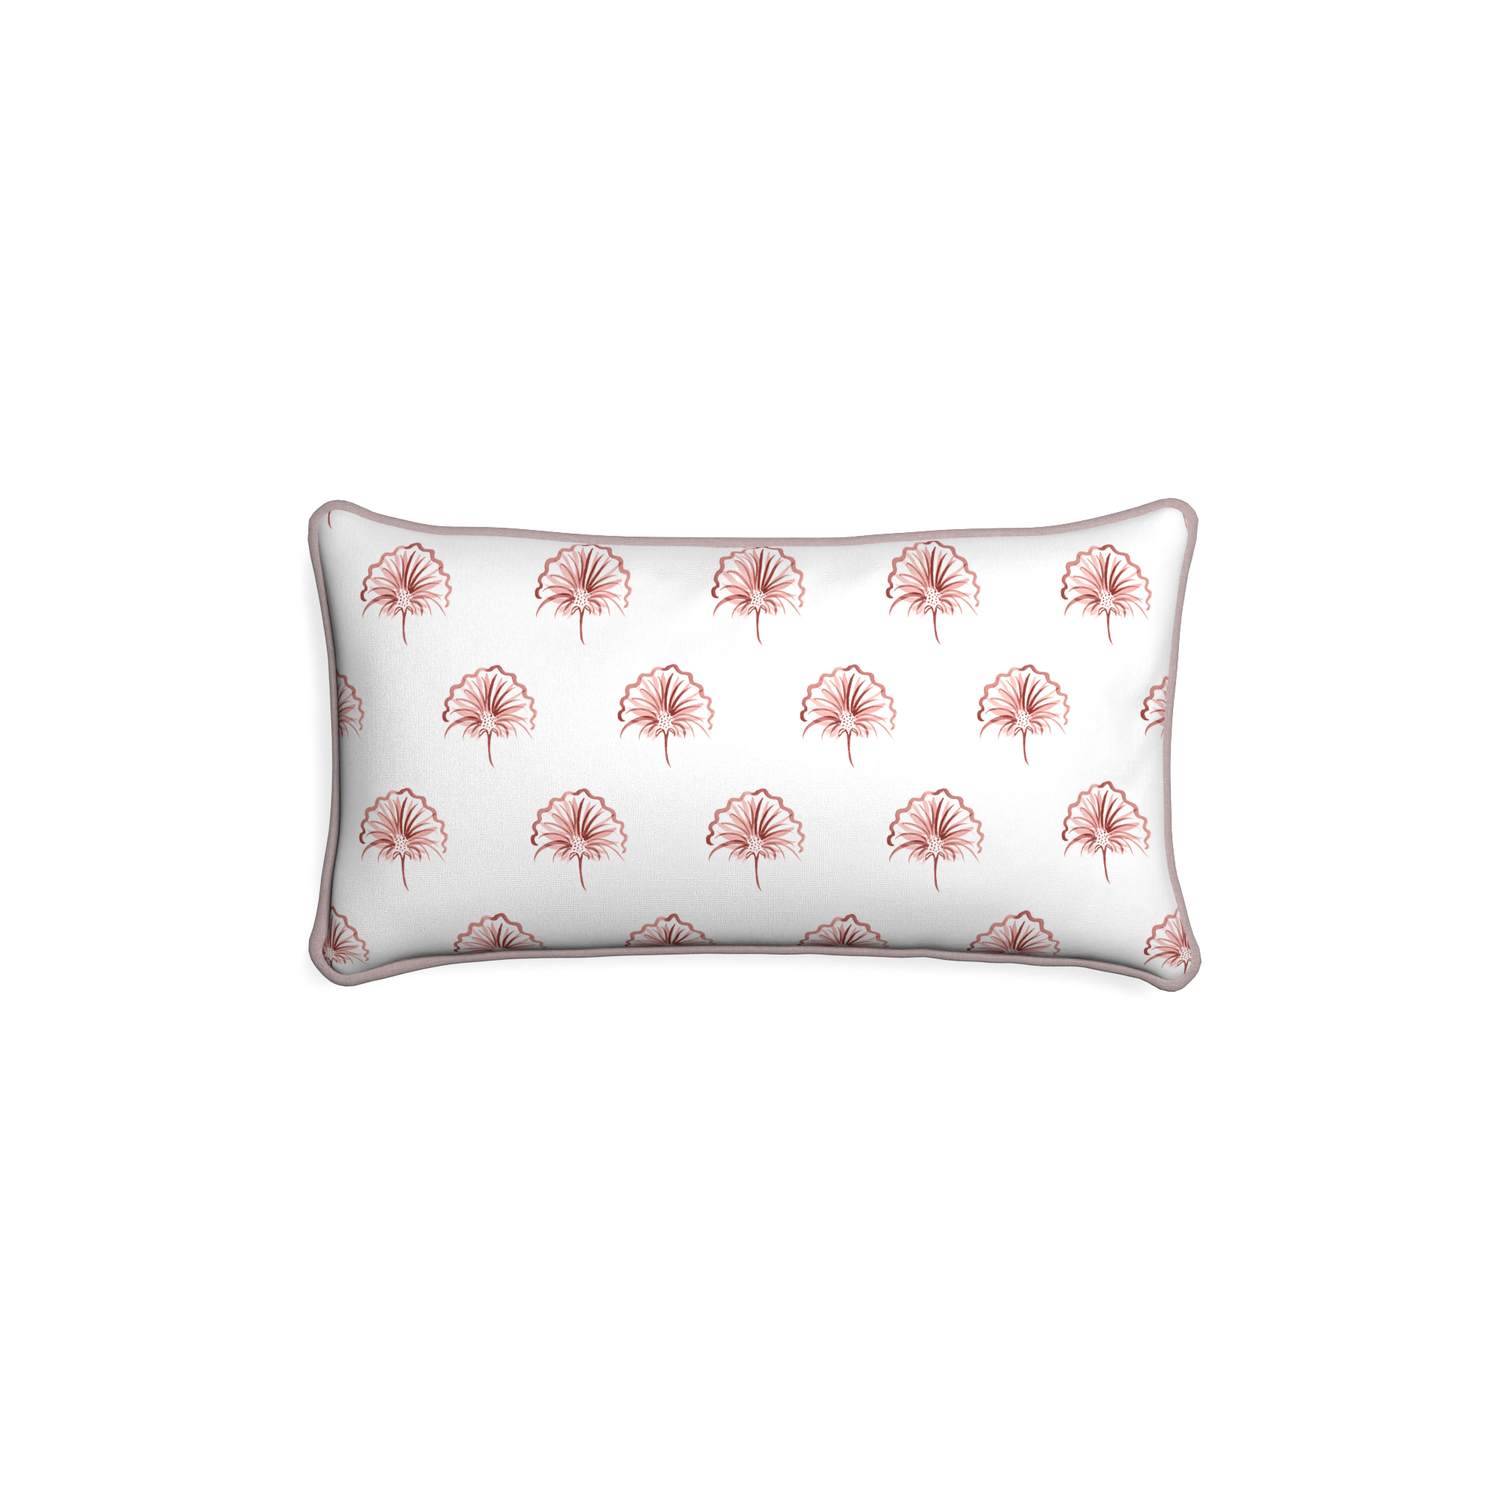 Petite-lumbar penelope rose custom floral pinkpillow with orchid piping on white background